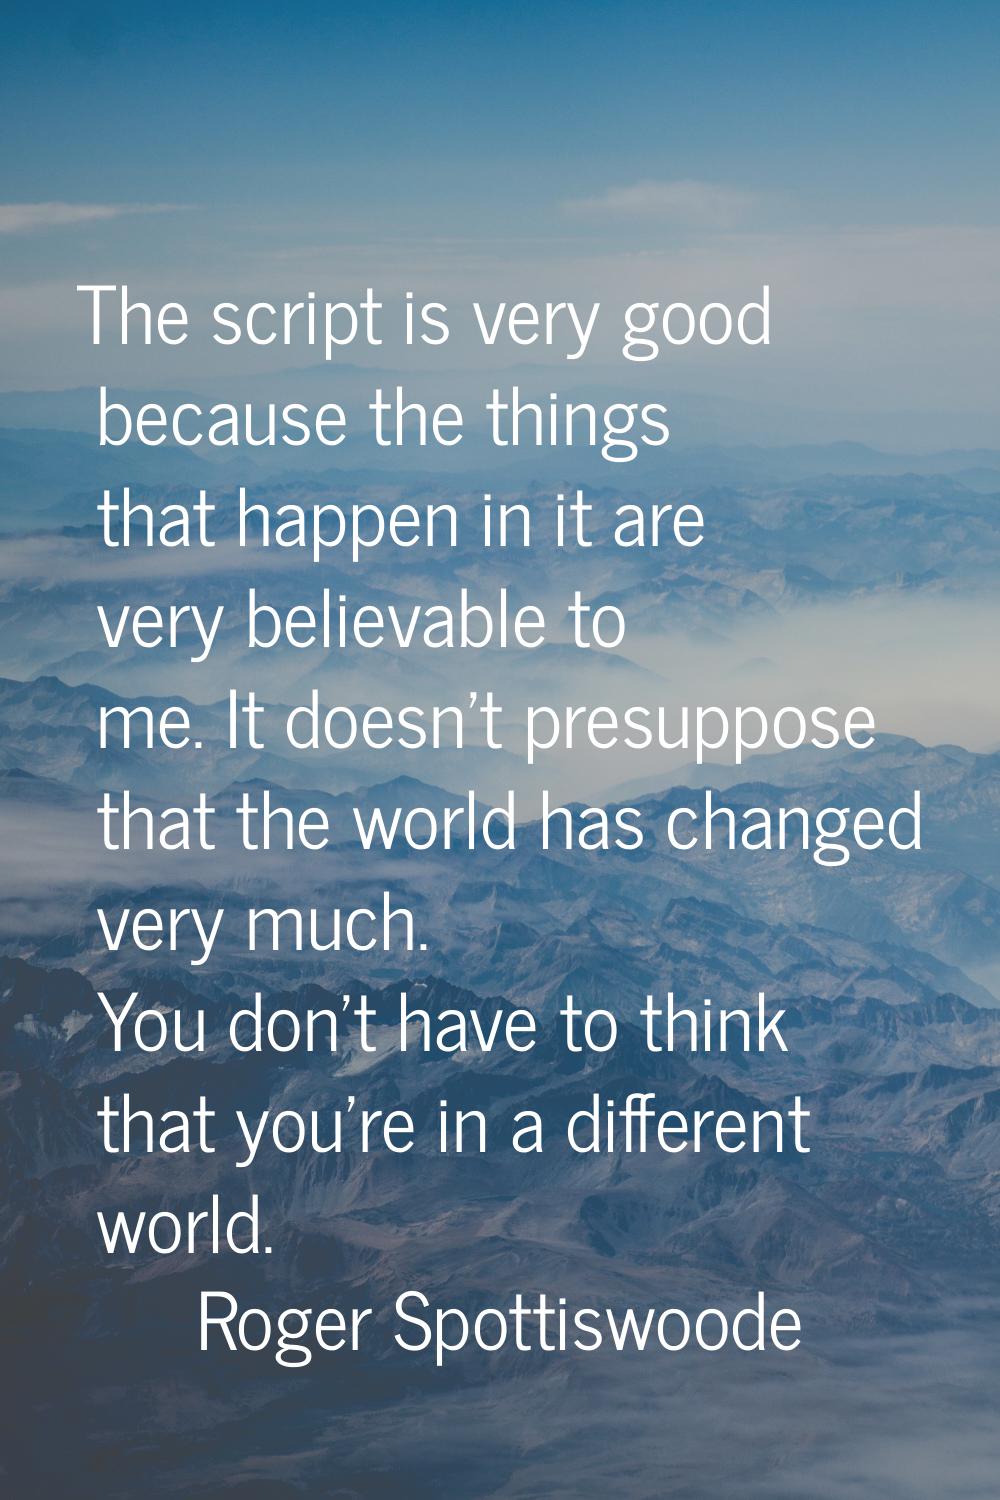 The script is very good because the things that happen in it are very believable to me. It doesn't 